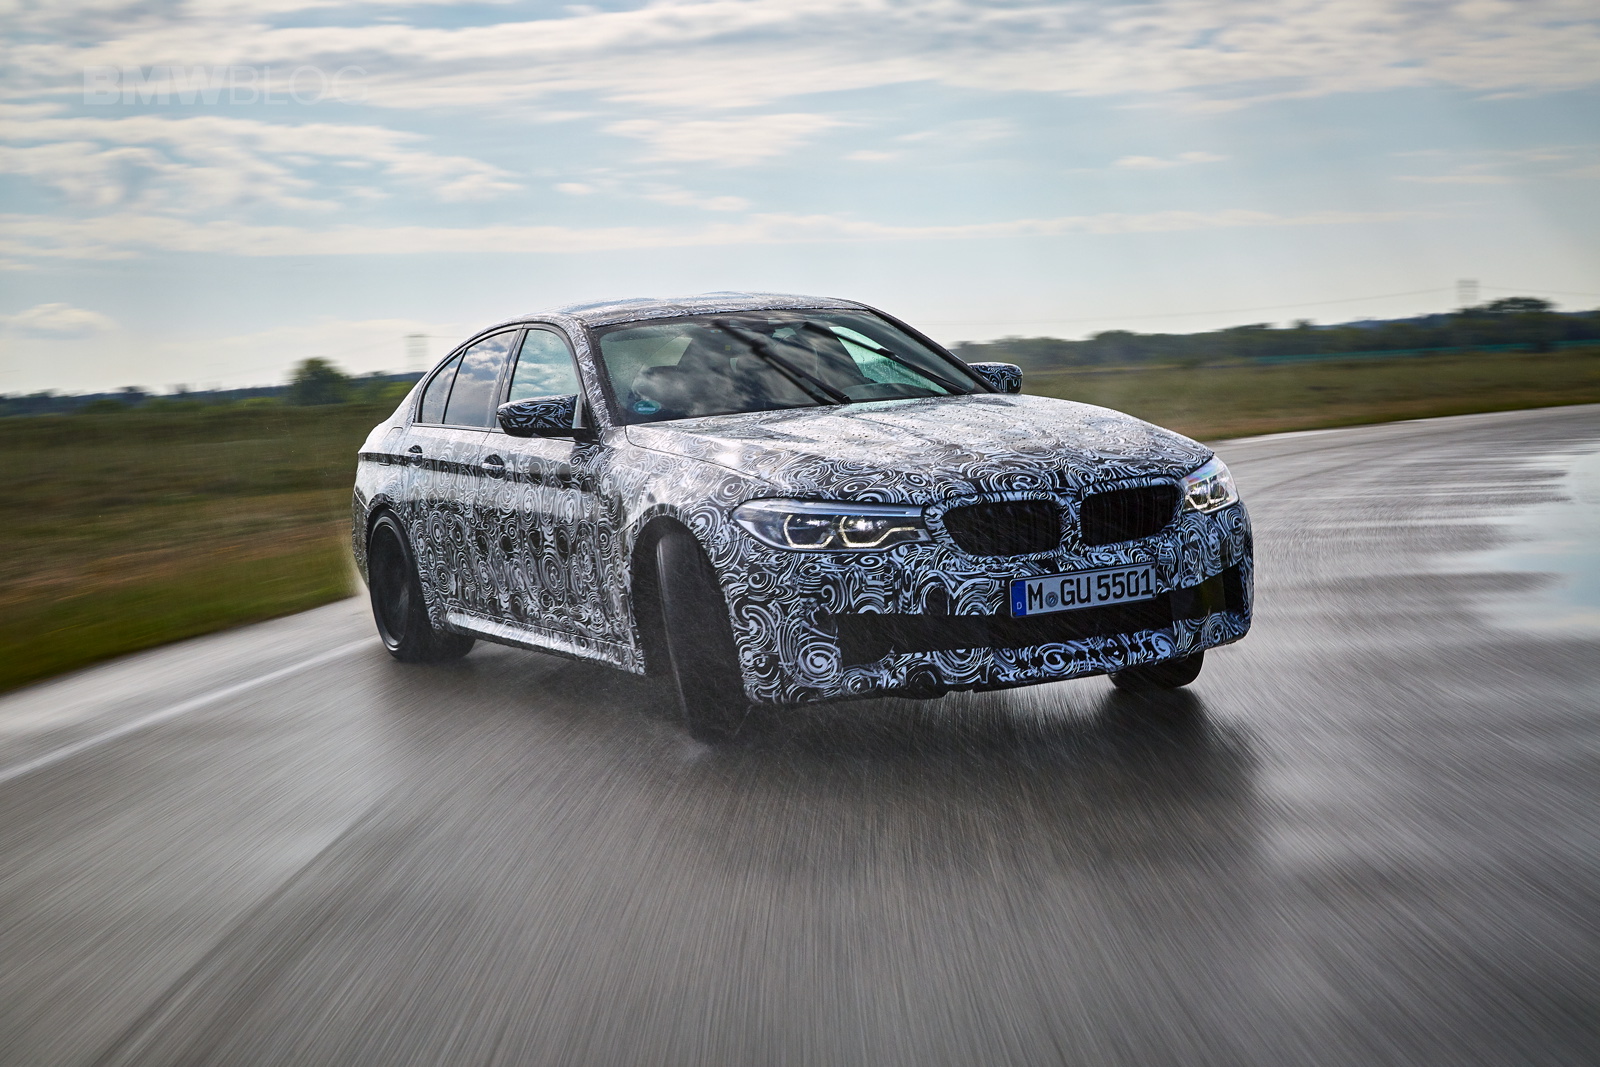 The Ultimate Driving Machine: The 2018 BMW M5